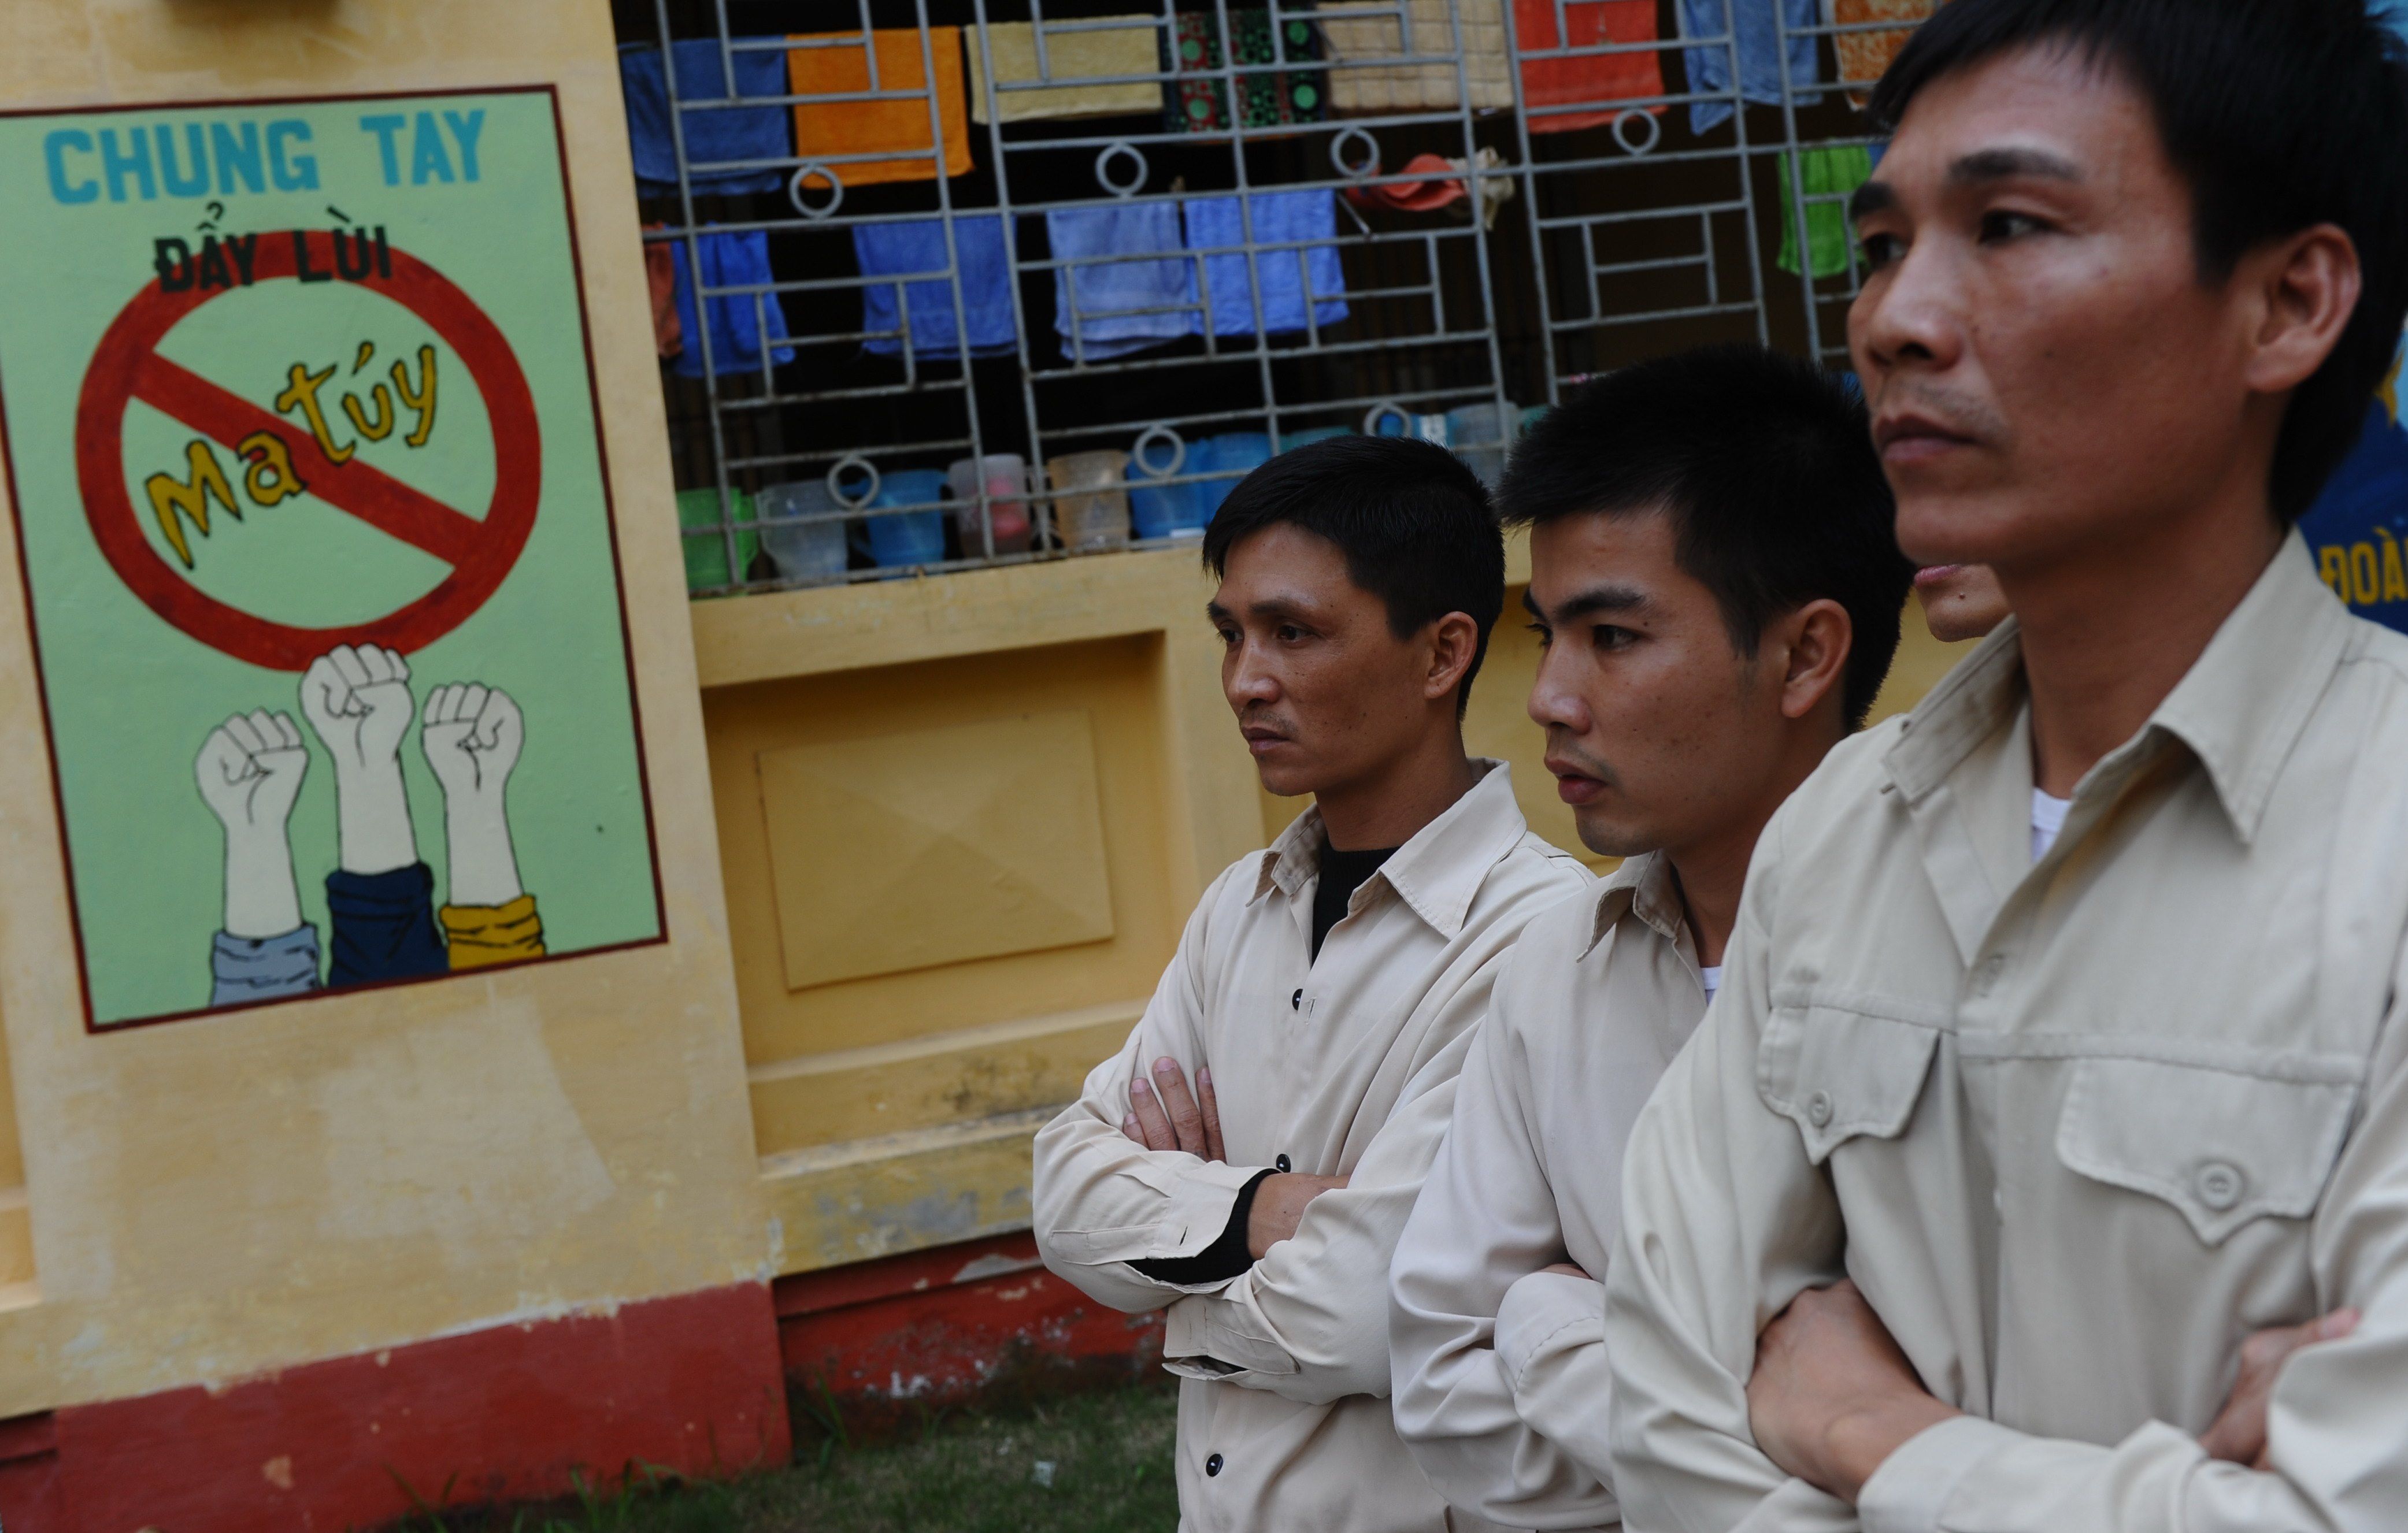 Drug addict inmates watch a music concert named "Bringing music into hospitals" on the World Aids Day at an official center for treatment of drug addicts in Hanoi in 2013. Photo: AFP 